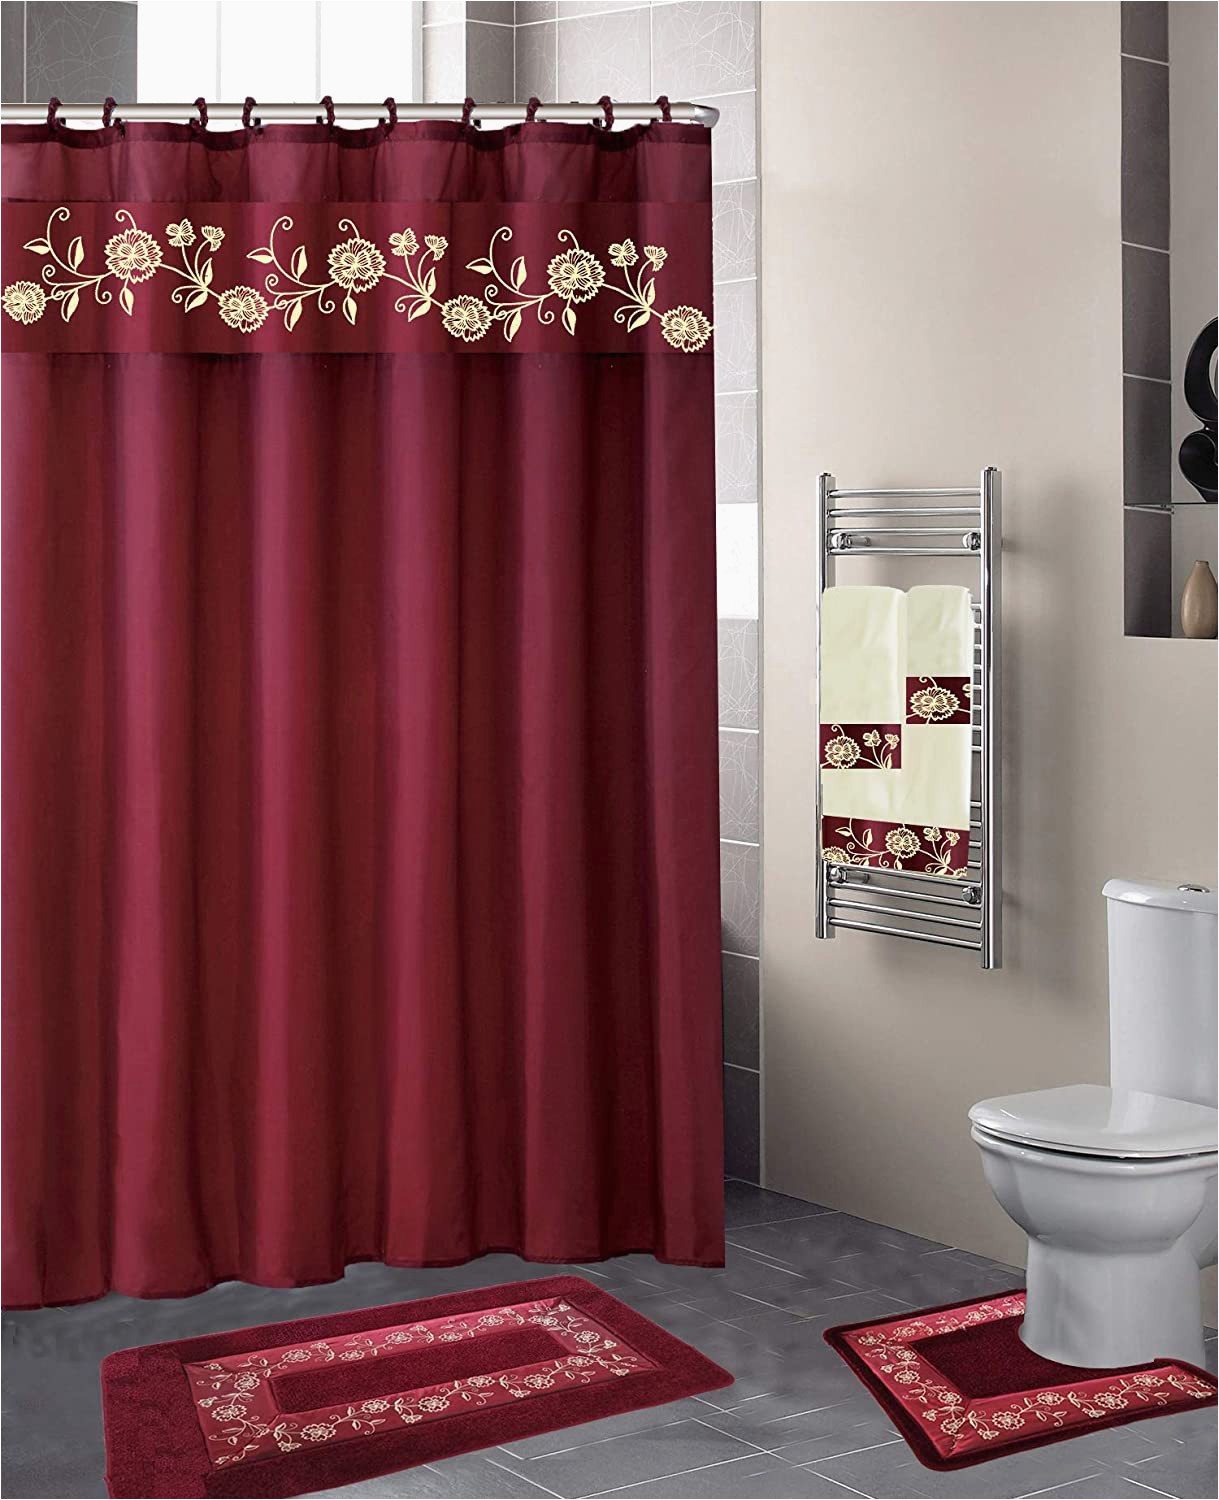 Red Bath Rug Set Luxury Home Collection 18 Pc Bath Rug Set Embroidery Non Slip Bathroom Rug Mats and Rug Contour and Shower Curtain and towels and Rings Hooks and